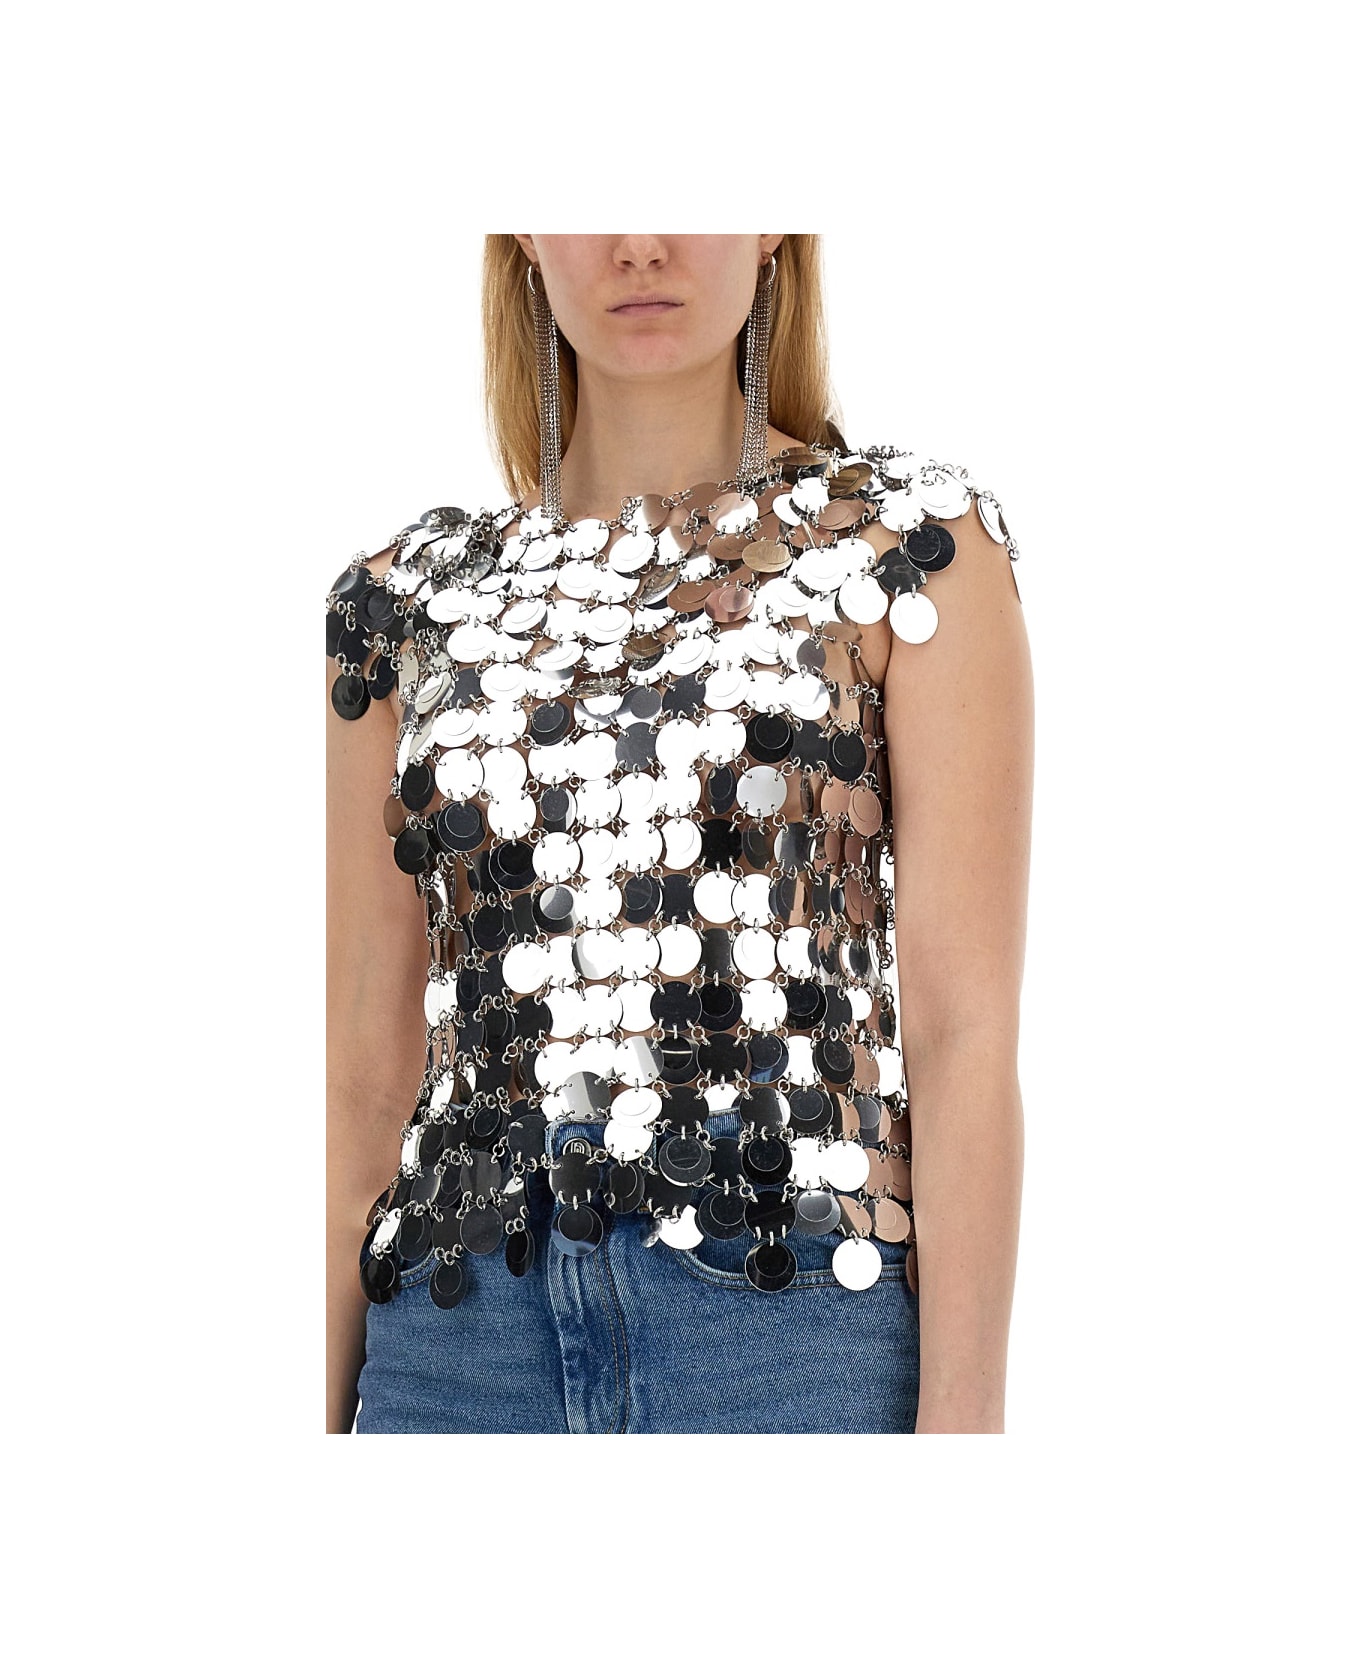 Paco Rabanne Top Iconic - SILVER